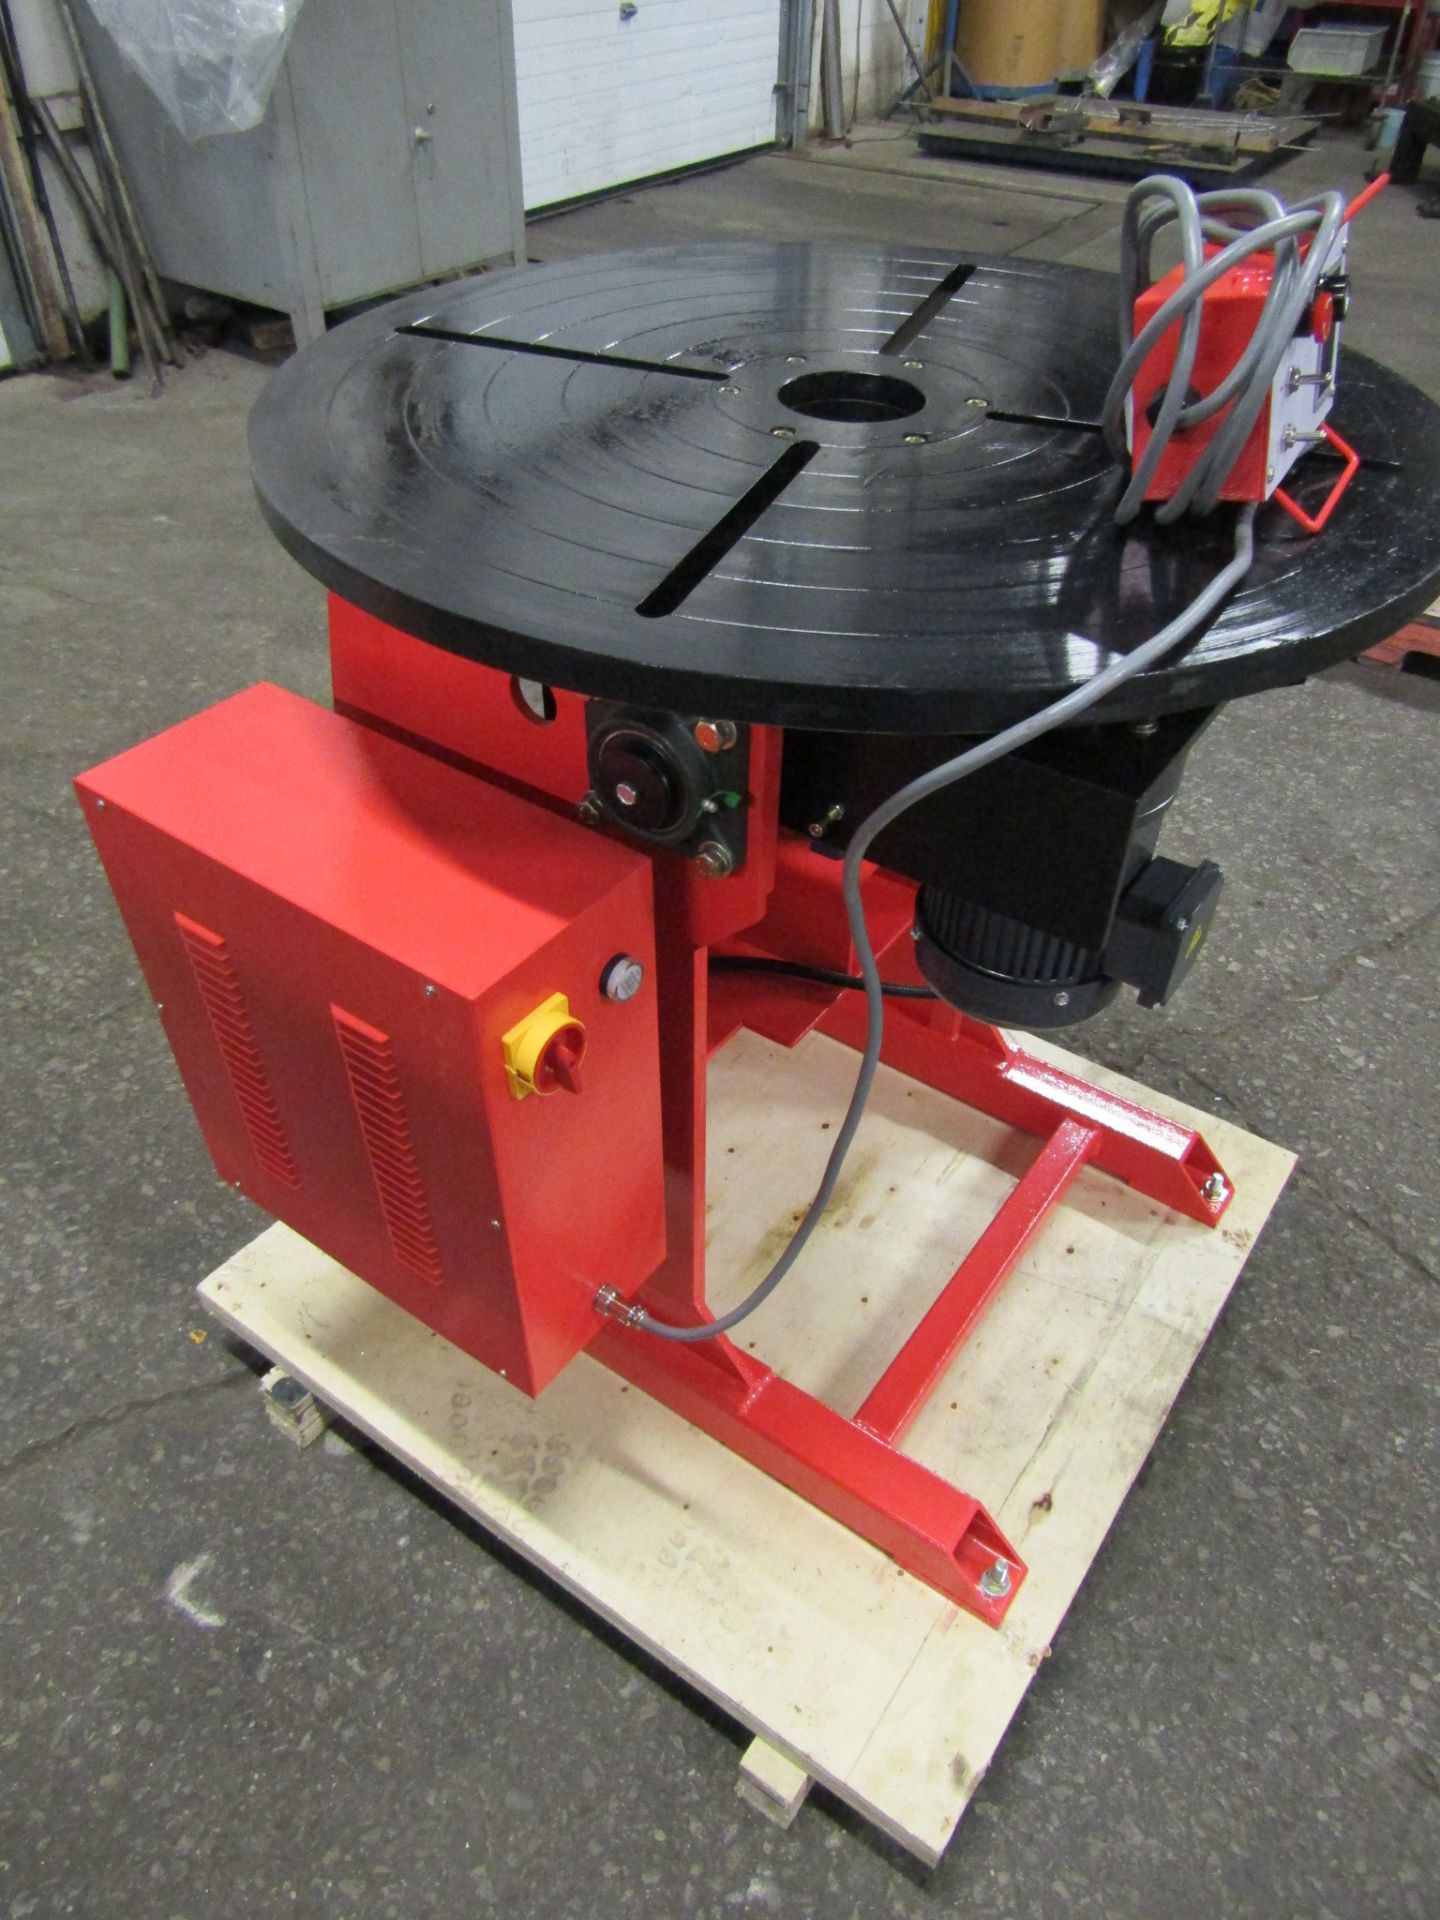 Verner model VD-1500 WELDING POSITIONER 1500lbs capacity - tilt and rotate with variable speed drive - Image 2 of 3